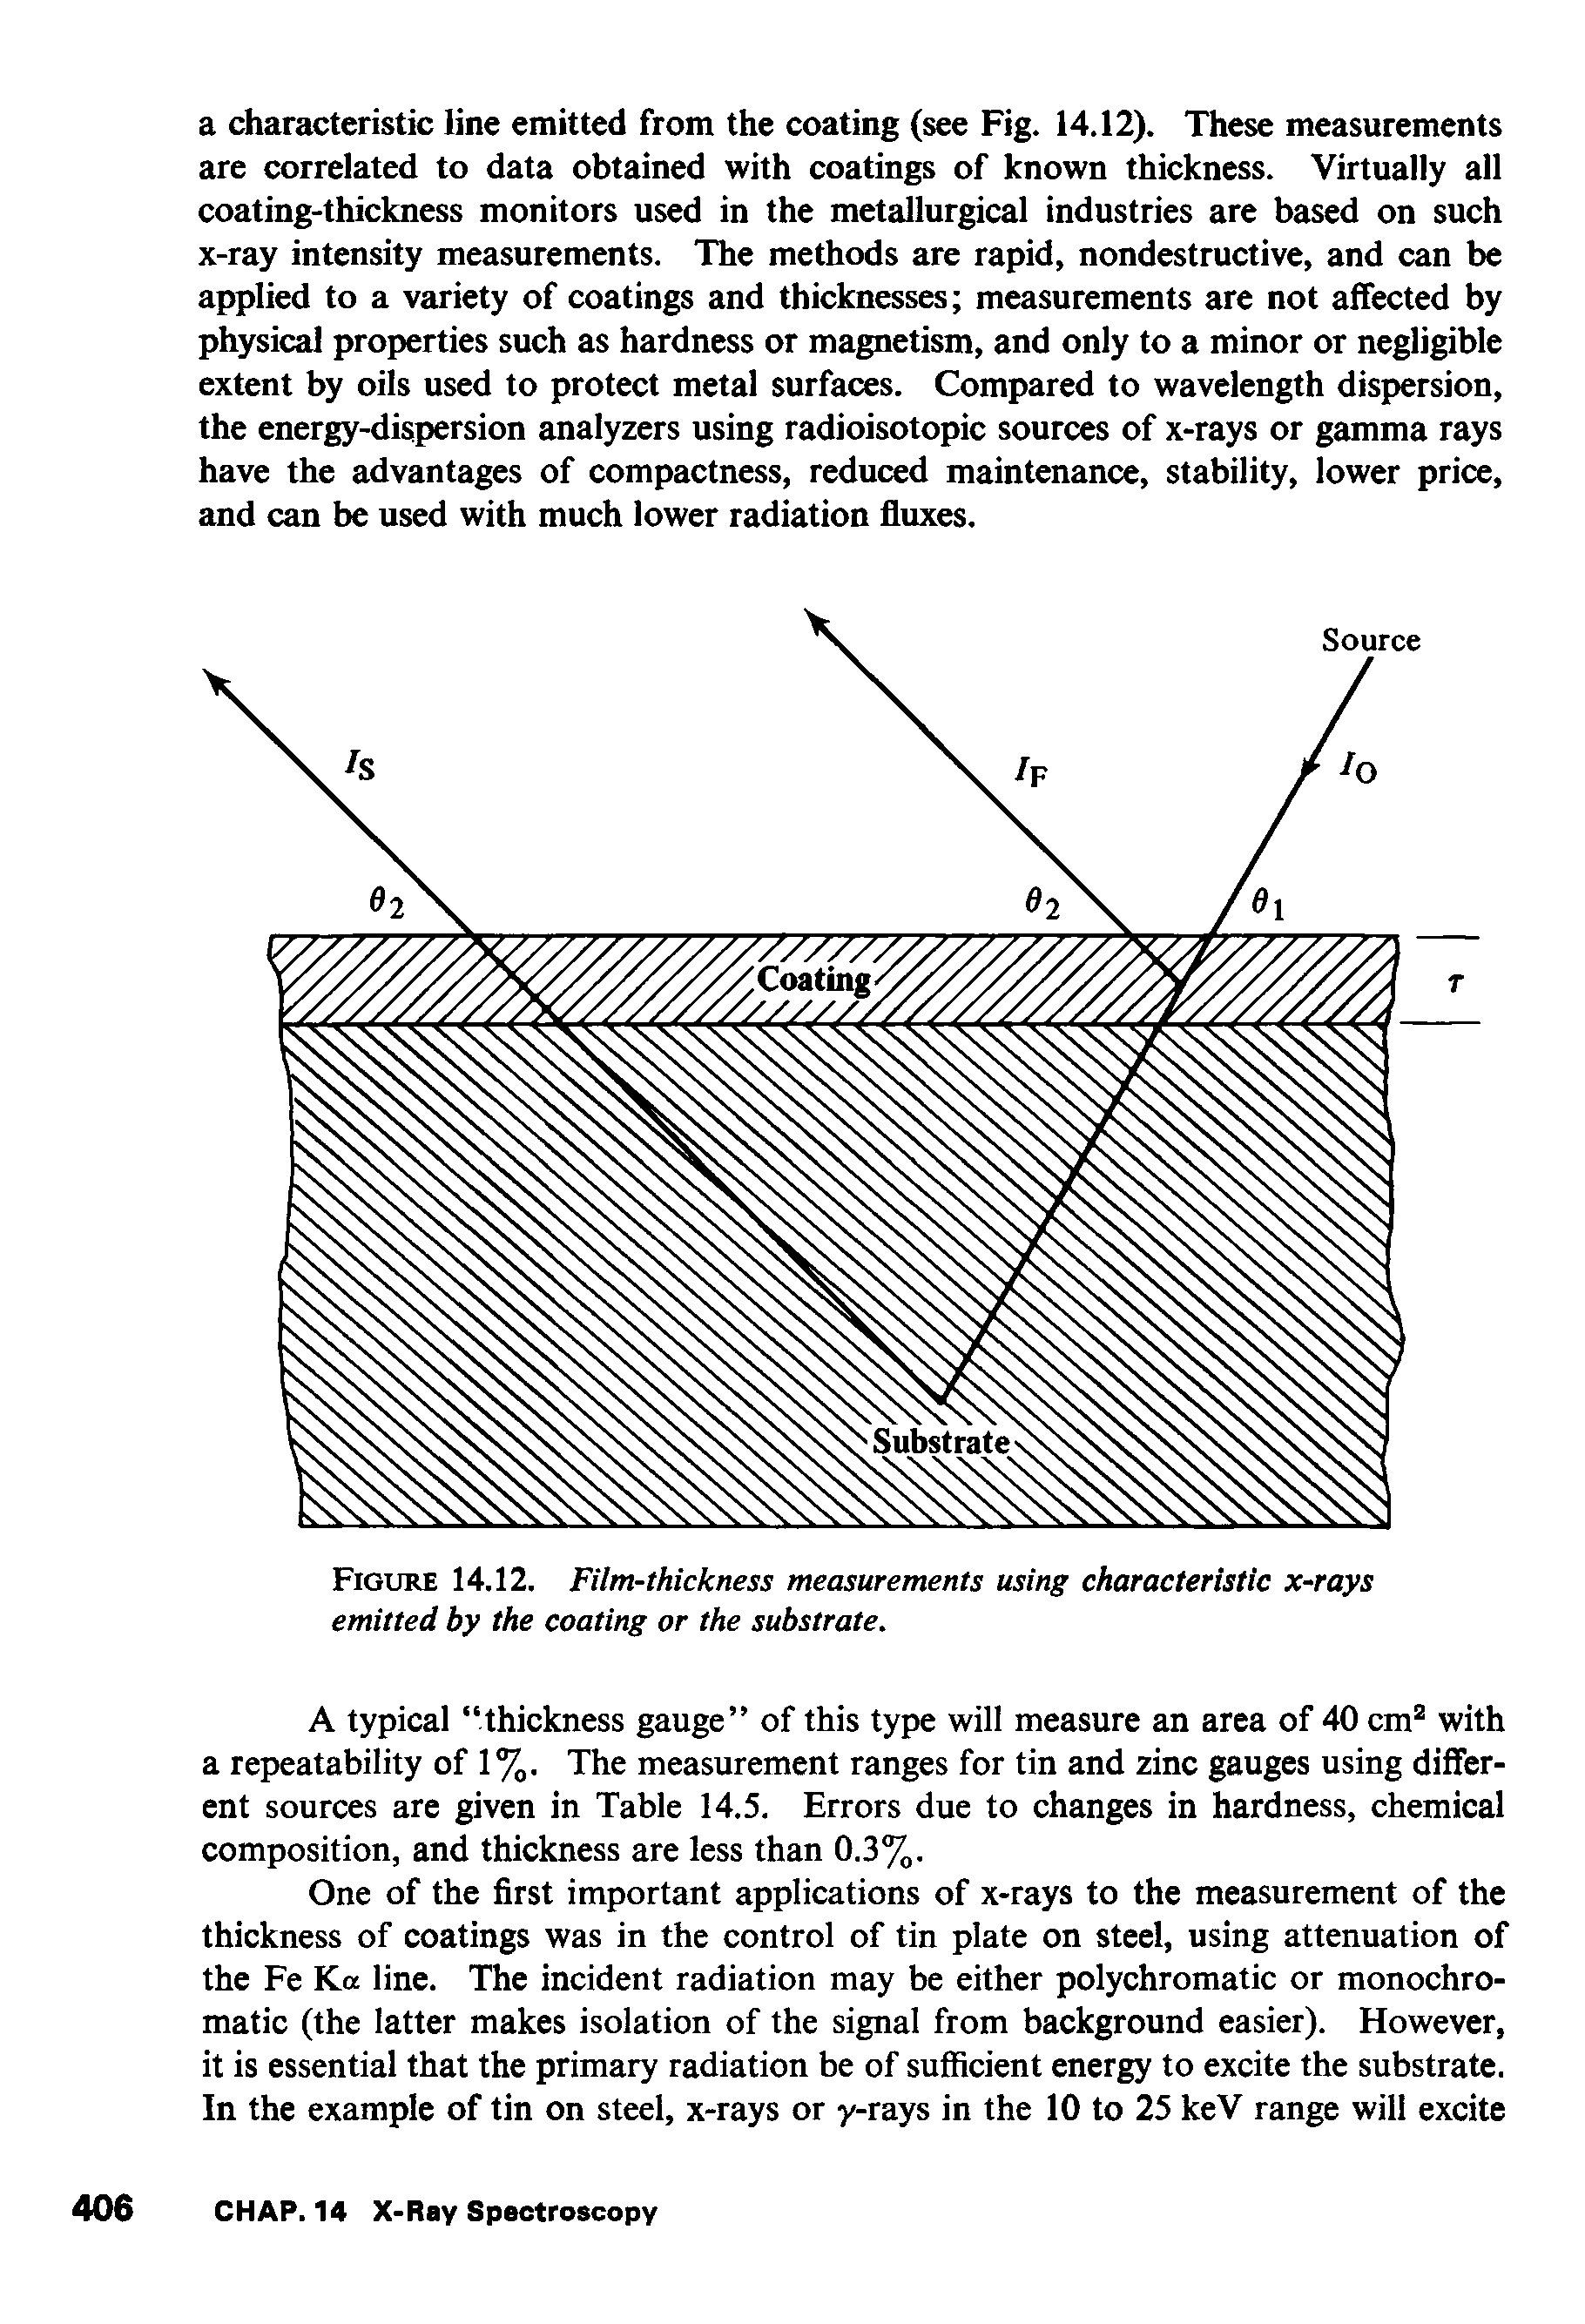 Figure 14.12. Film-thickness measurements using characteristic x-rays emitted by the coating or the substrate.